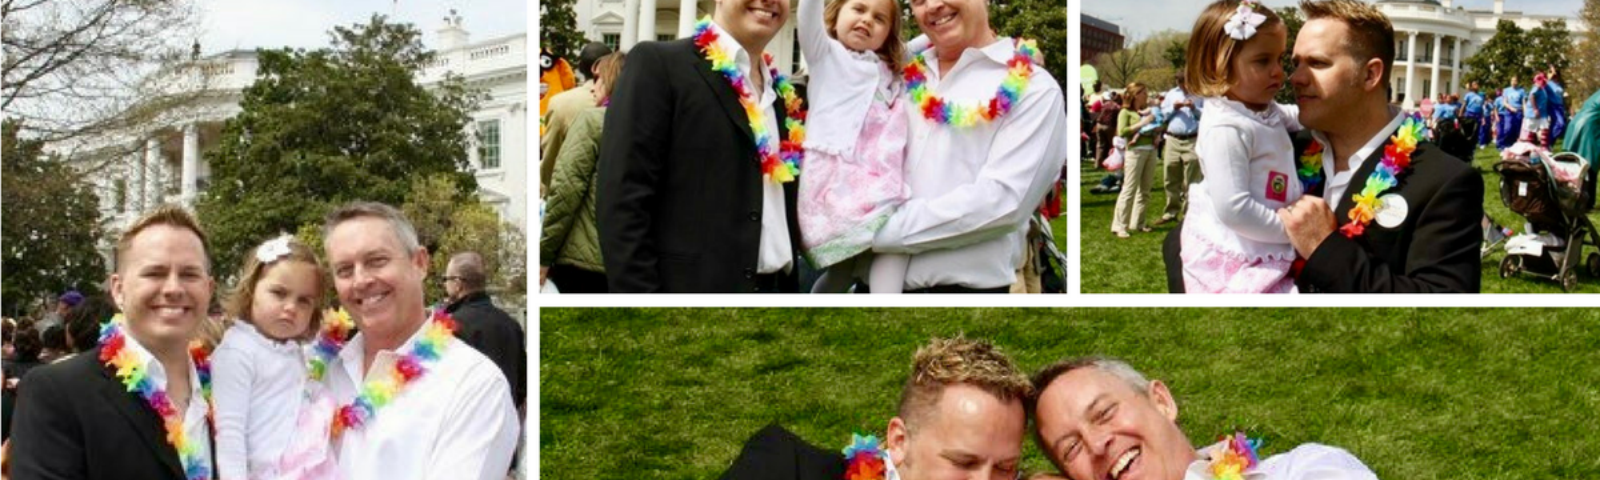 LGBTQ Families at the White House Easter Egg Roll: What Did It Mean To Me?